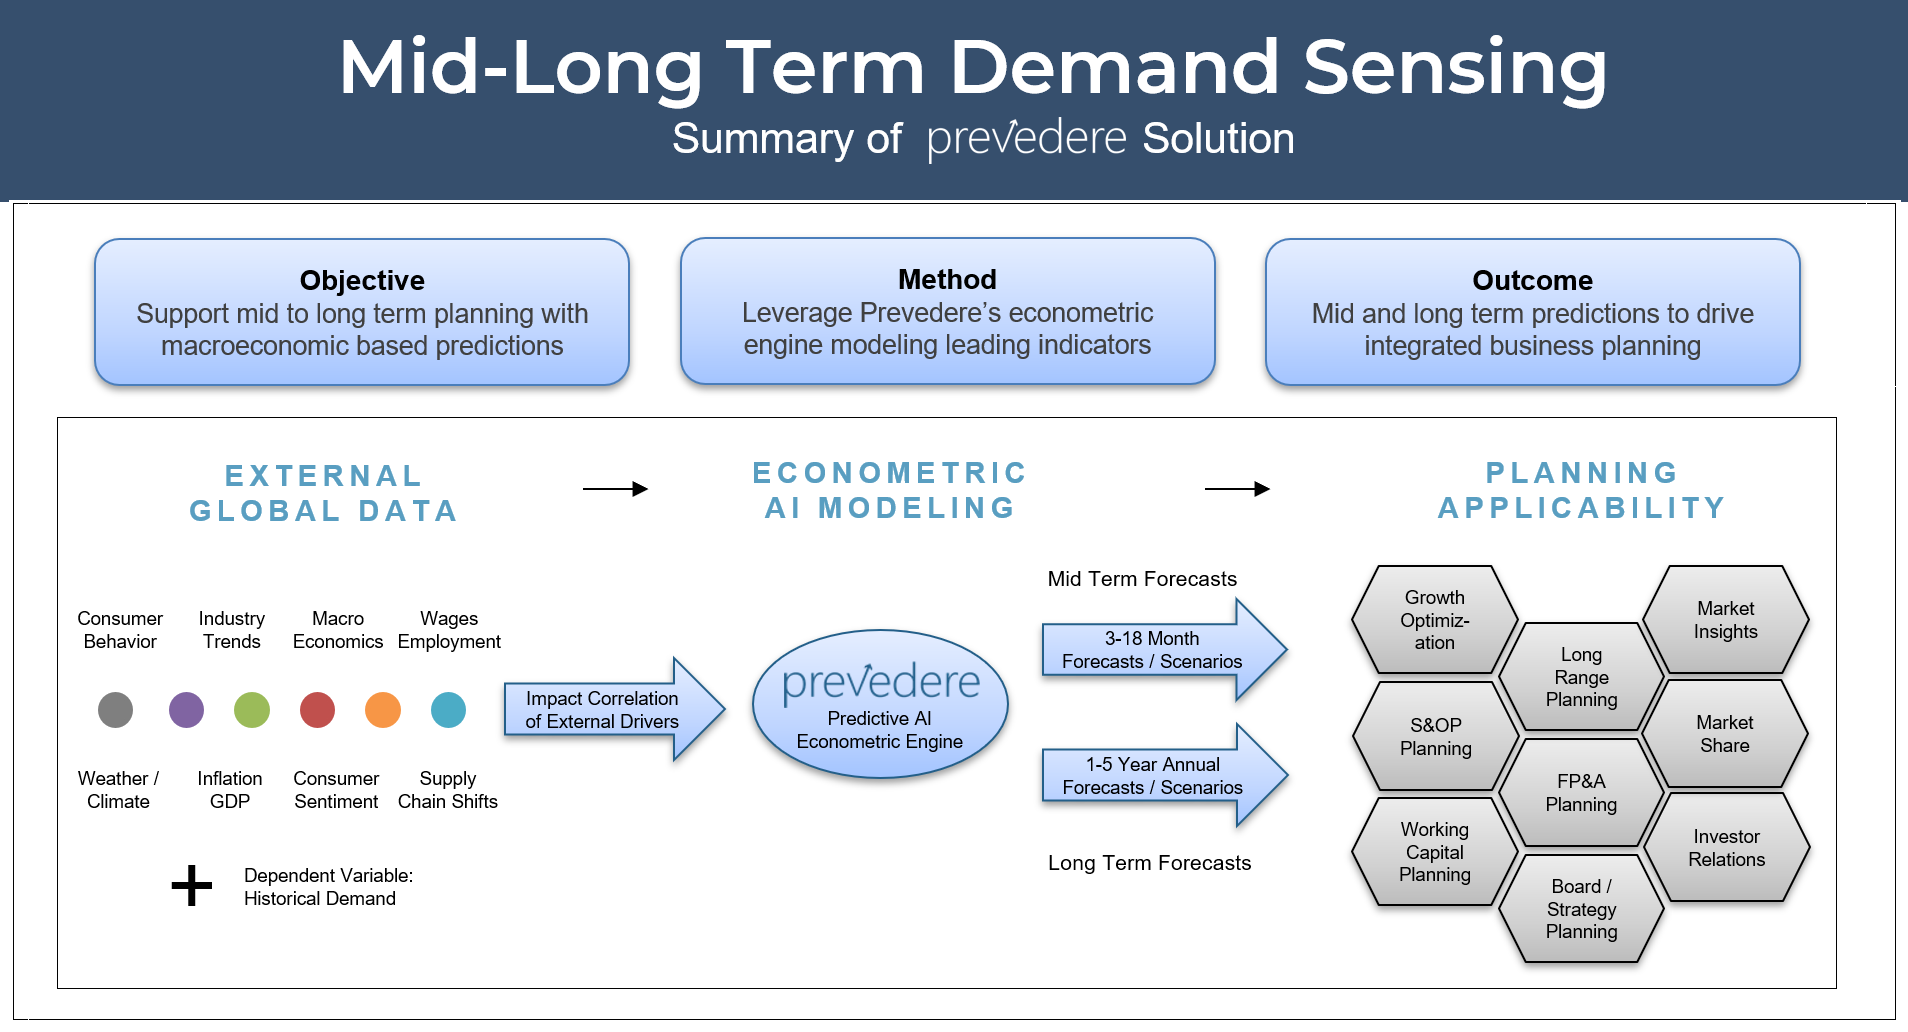 A summary of Prevedere's mid-long term demand sensing solution.